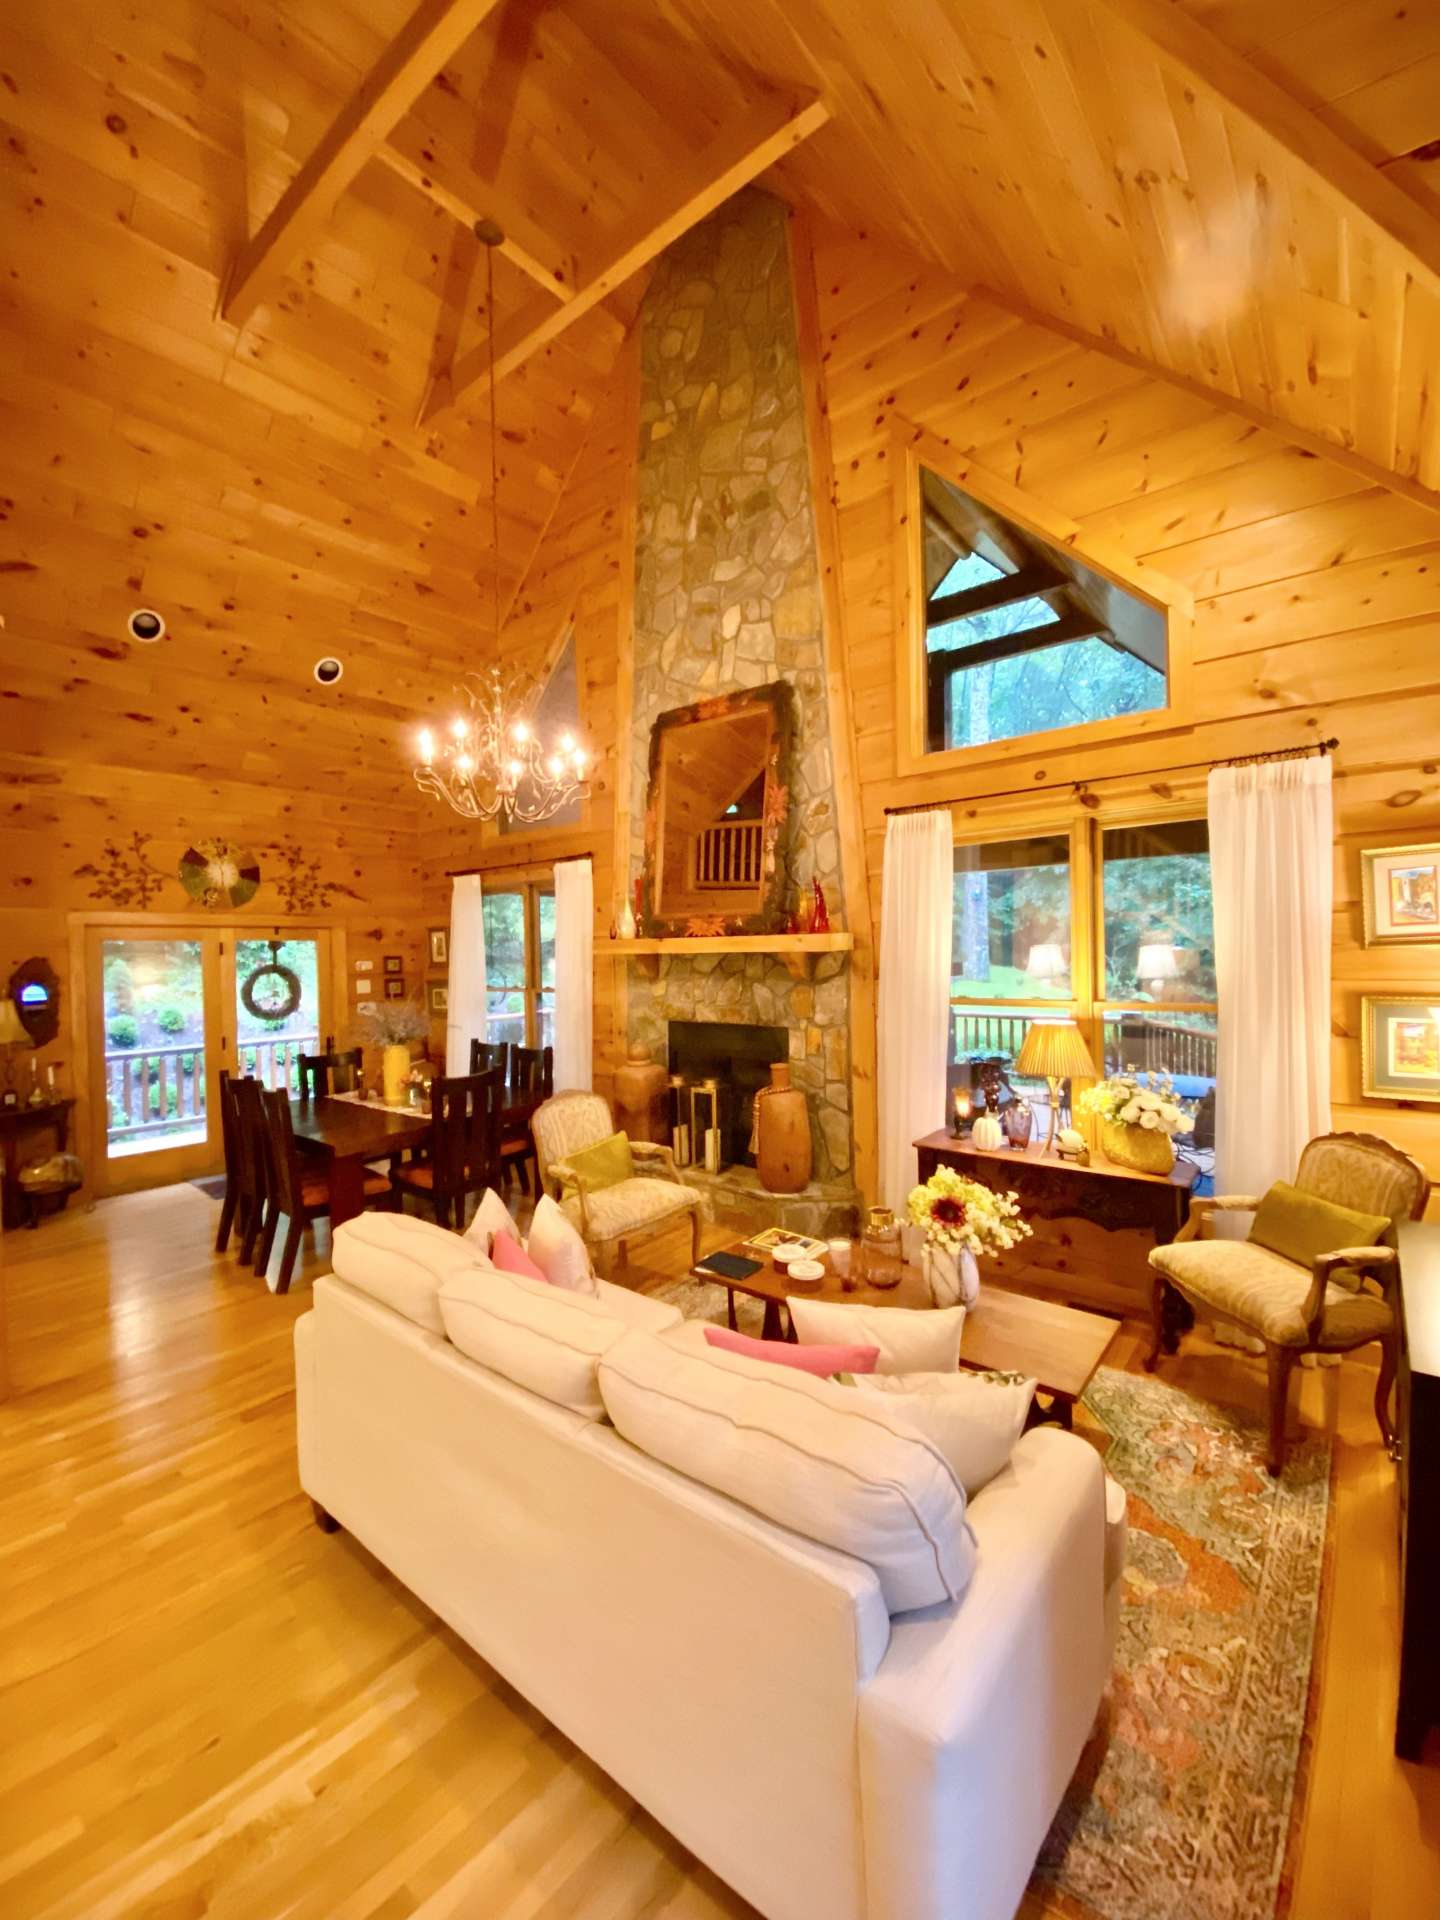 Vaulted ceilings and a wall of windows to enhance the open floor plan and fills the cabin with natural light.